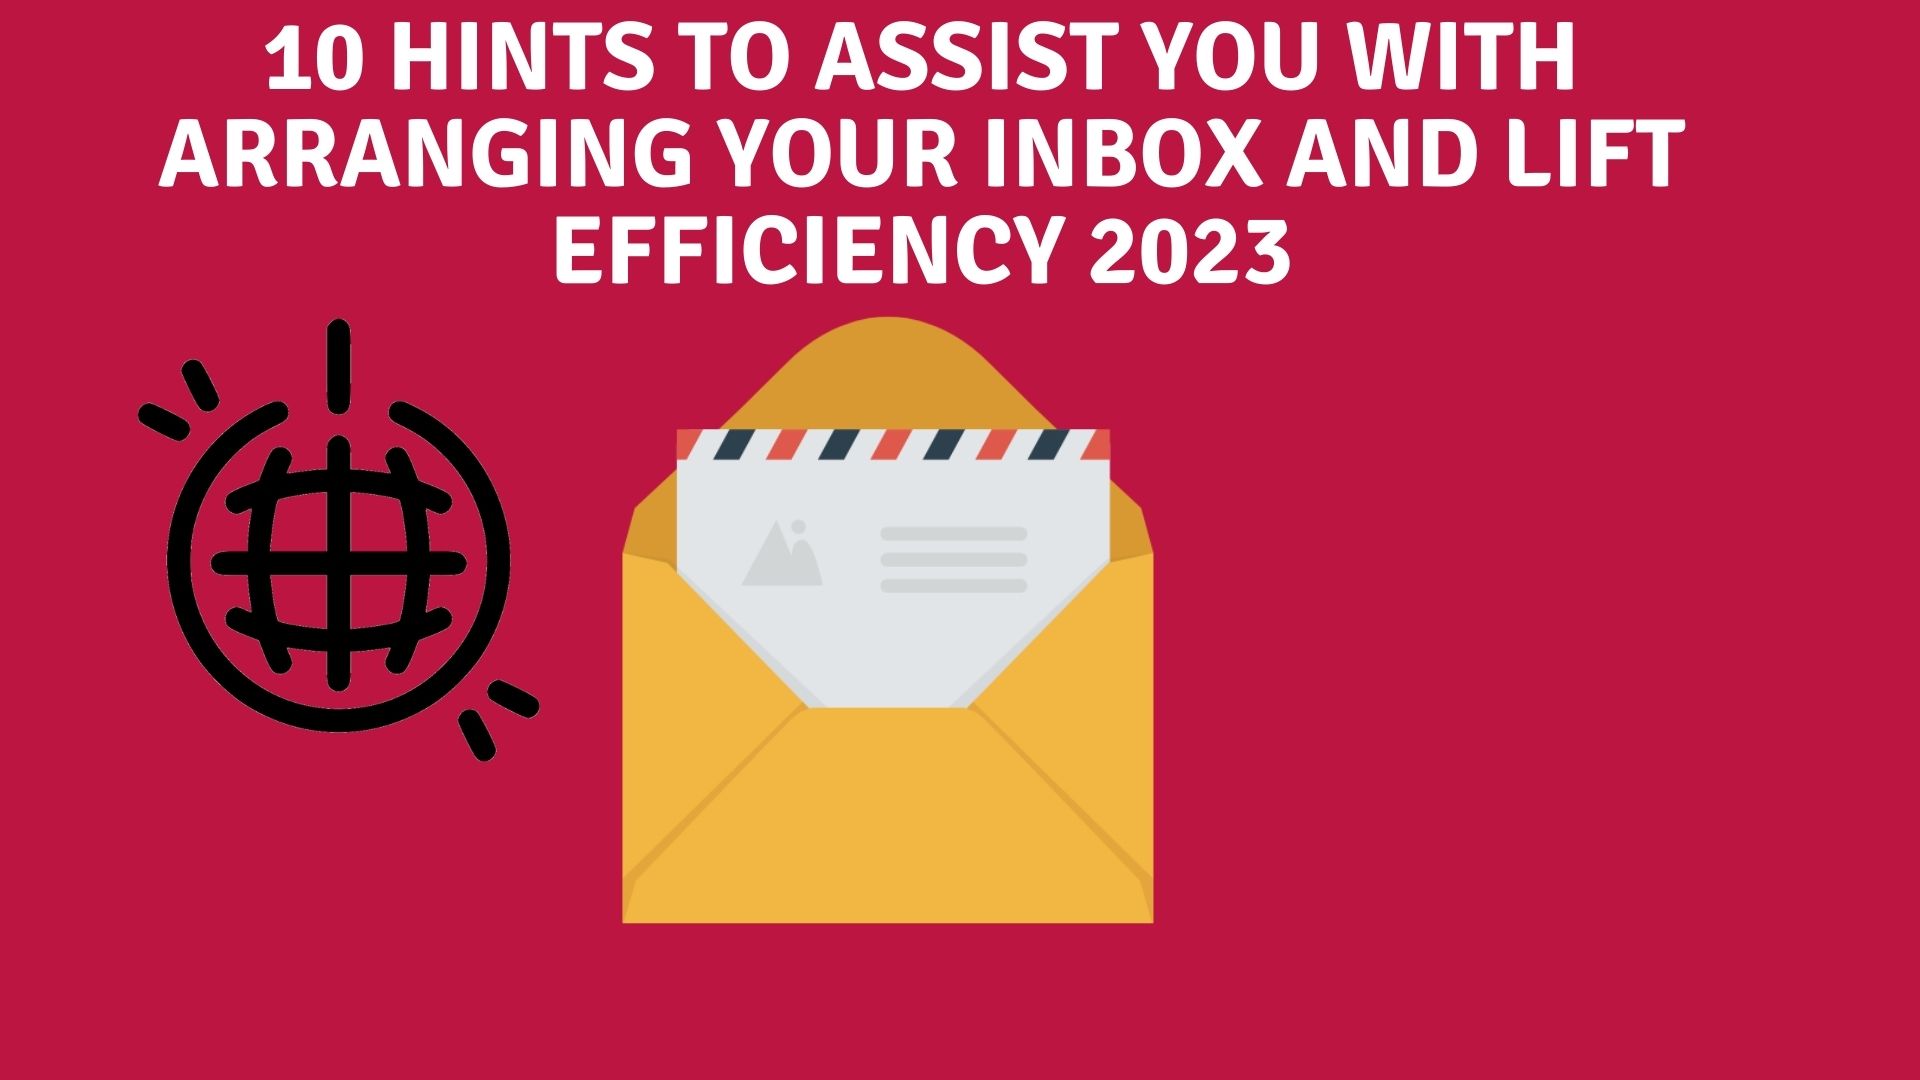 10 hints to assist you with arranging your inbox and lift efficiency 2023